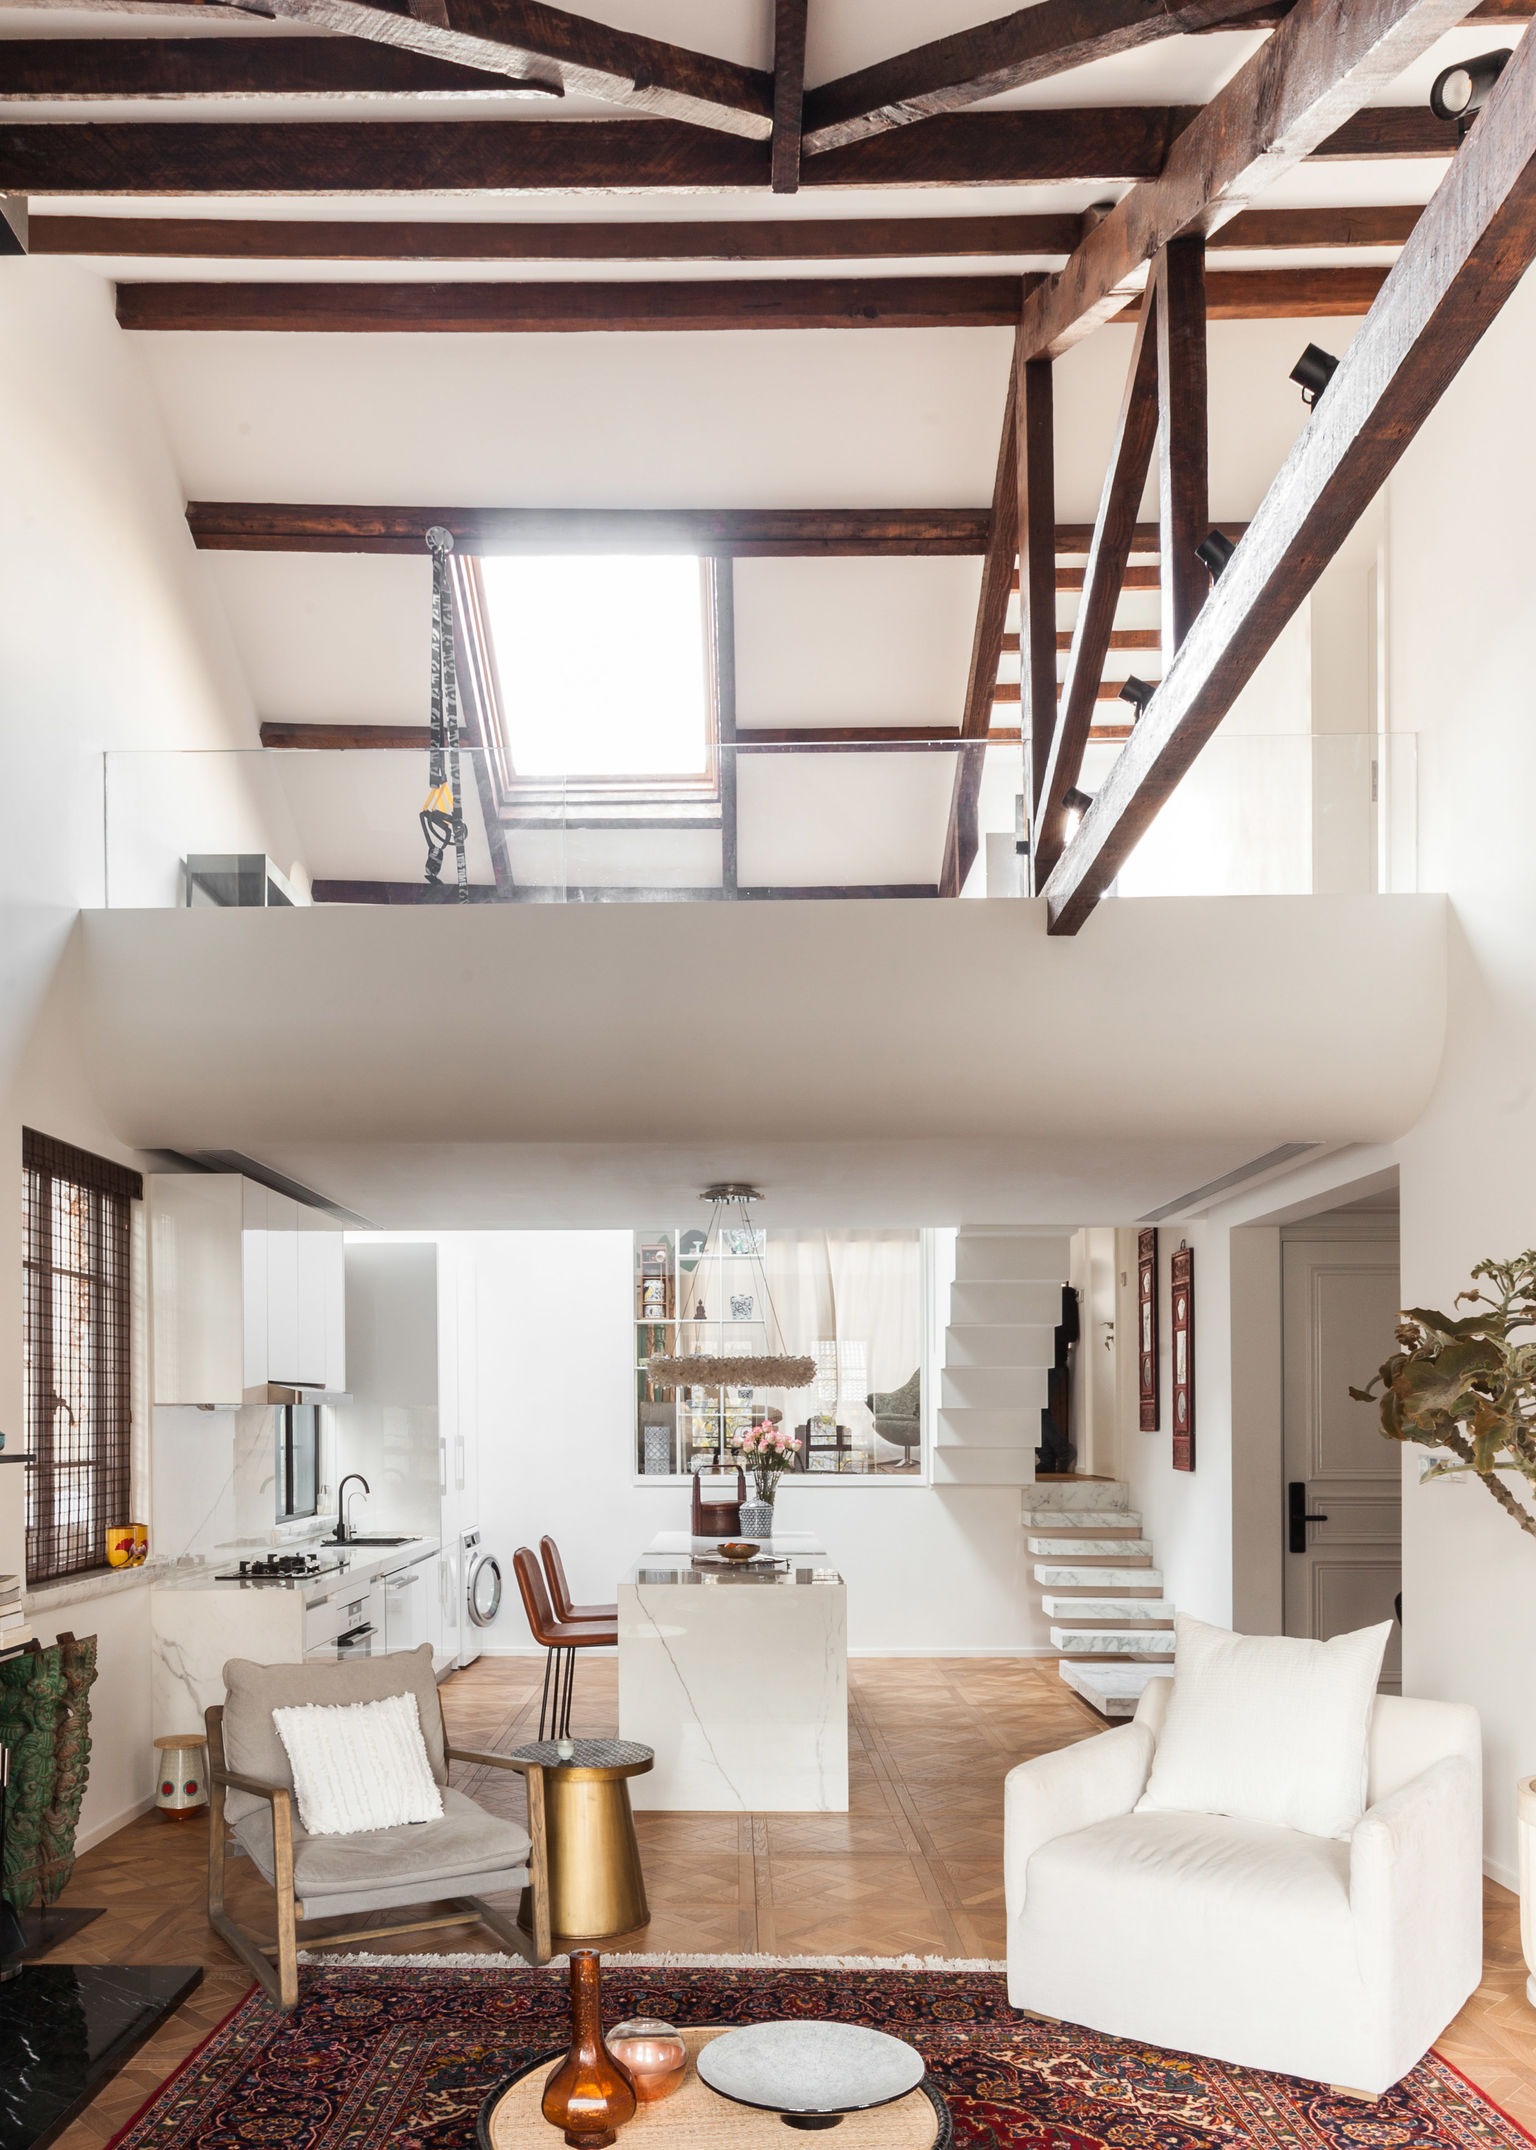 A 1930s Mansion Gets A Fusion Renovation